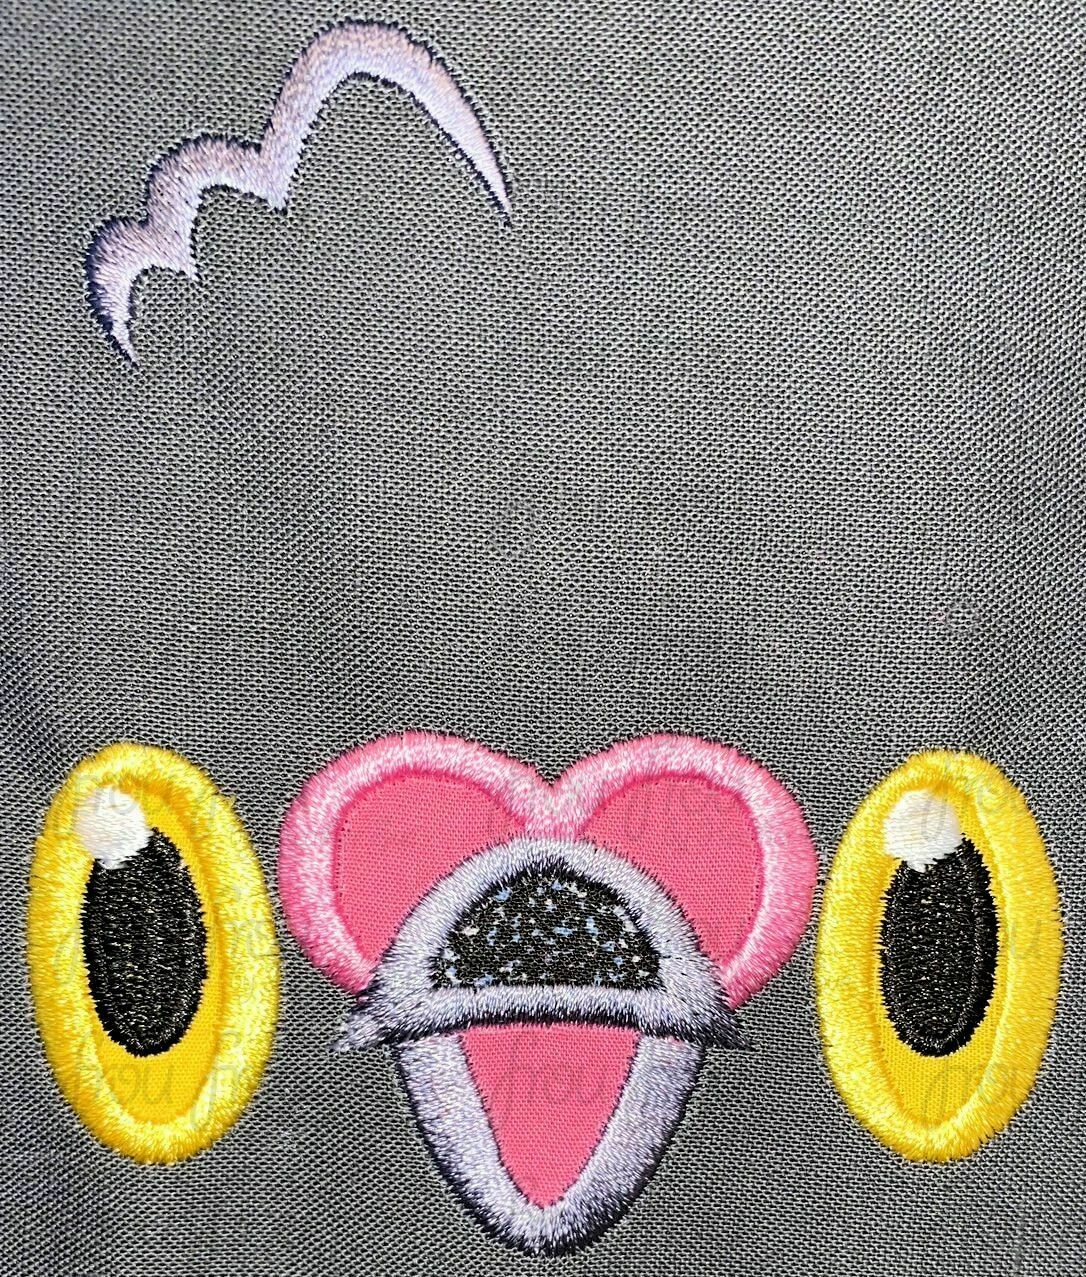 Pigeon Poke Man Just Face Machine Applique and filled Embroidery Design 2